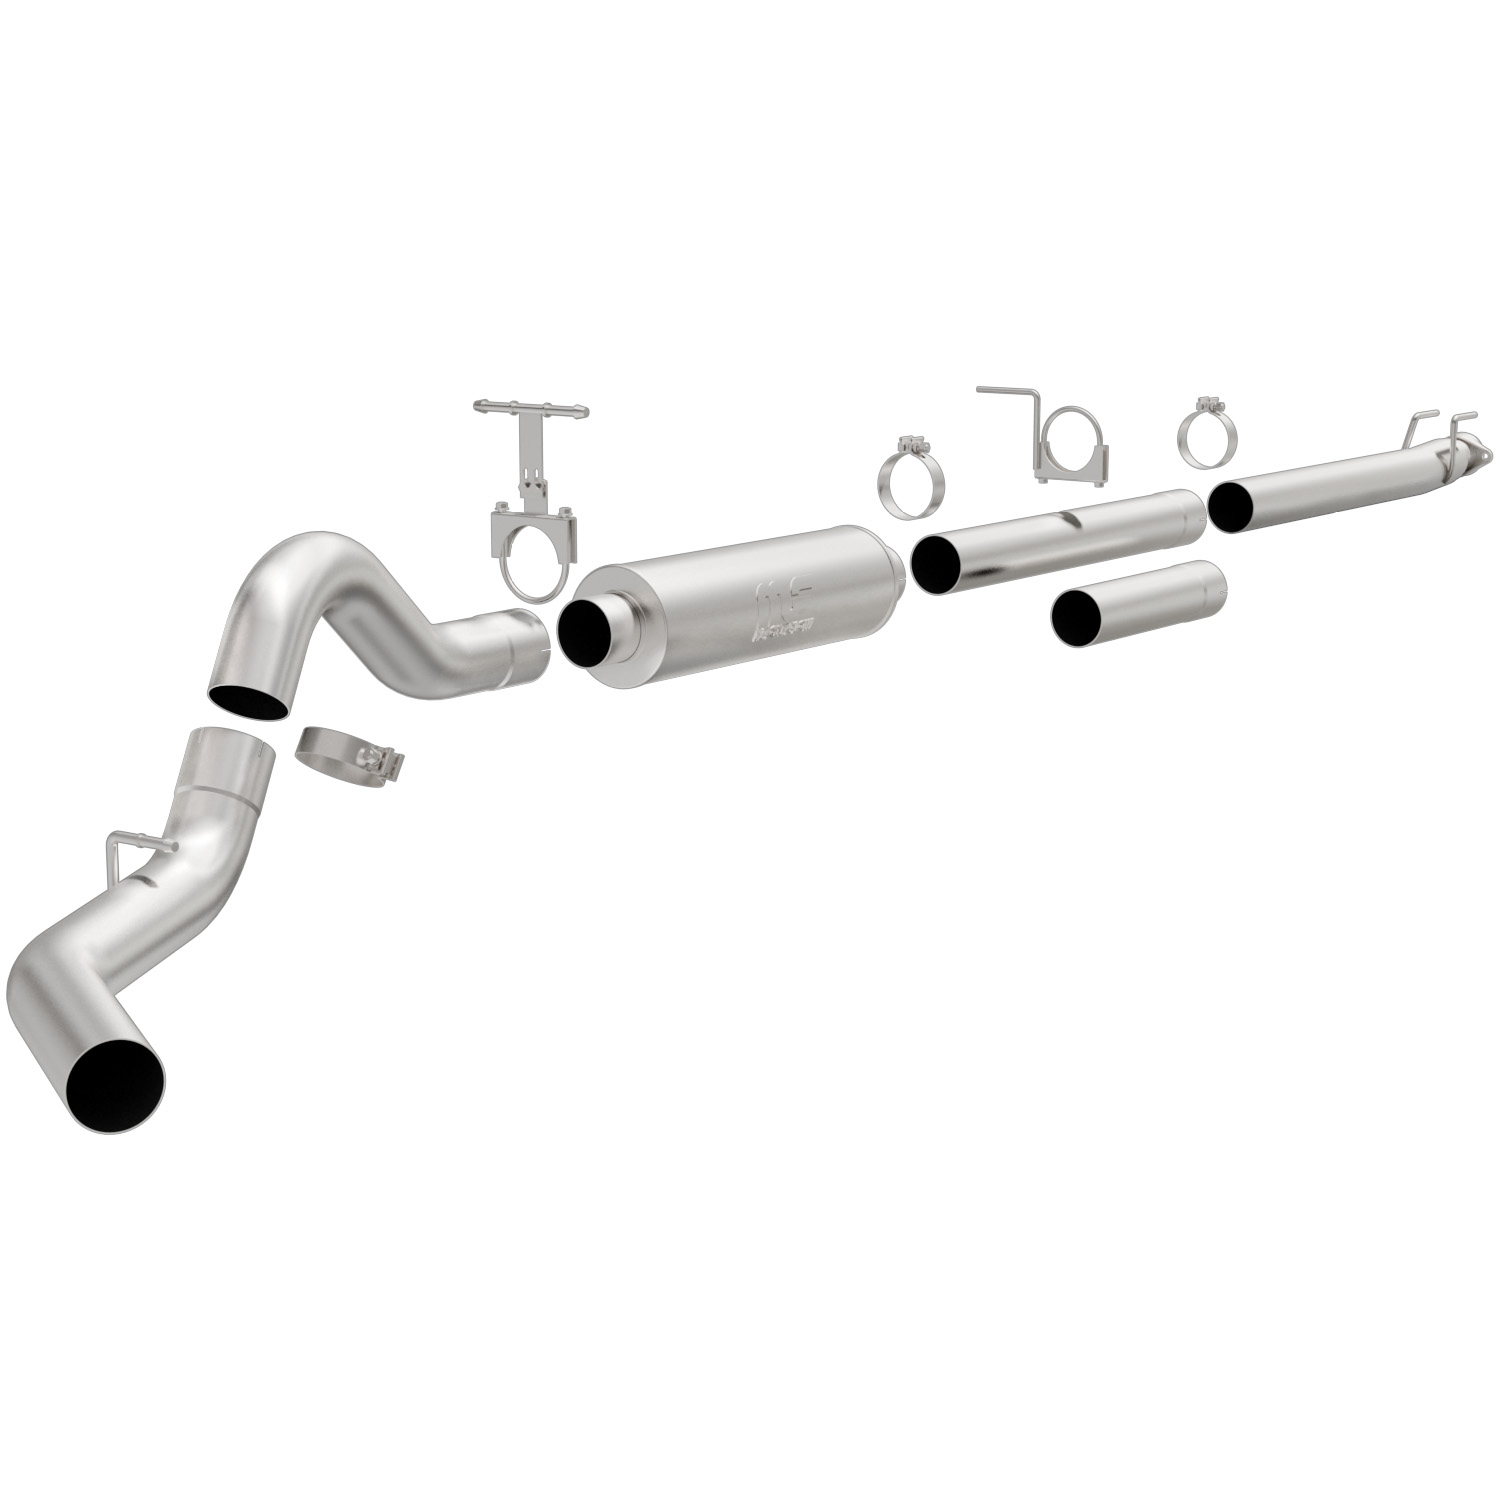 Pro Series Downpipe-Back Exhaust System 1994-1997 Ford F-250/F-350 Super Duty 7.3L Diesel